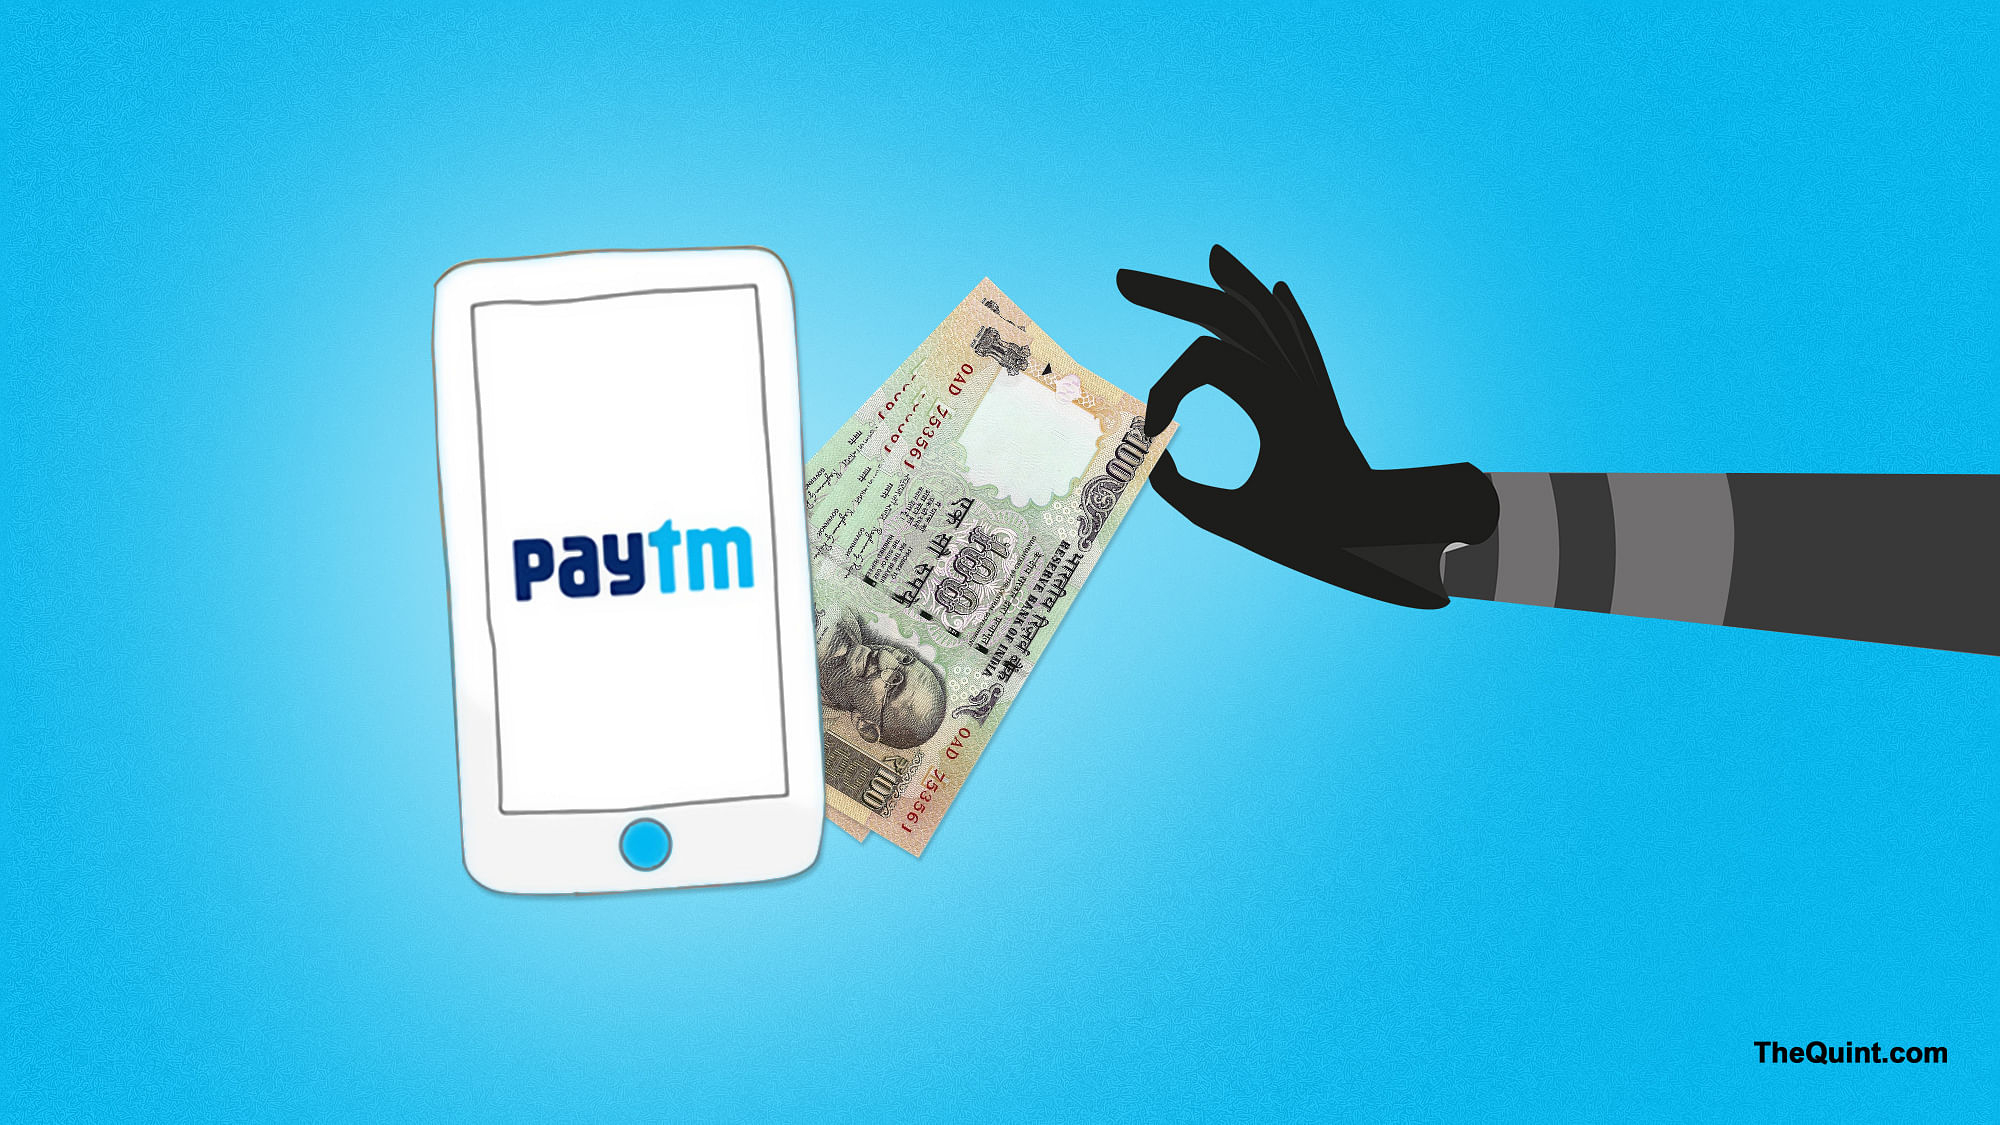 Dubbed as ‘Prank Paytm’, the fake app shows a message exactly like the original Paytm payment screen that shows the payment has been successful.